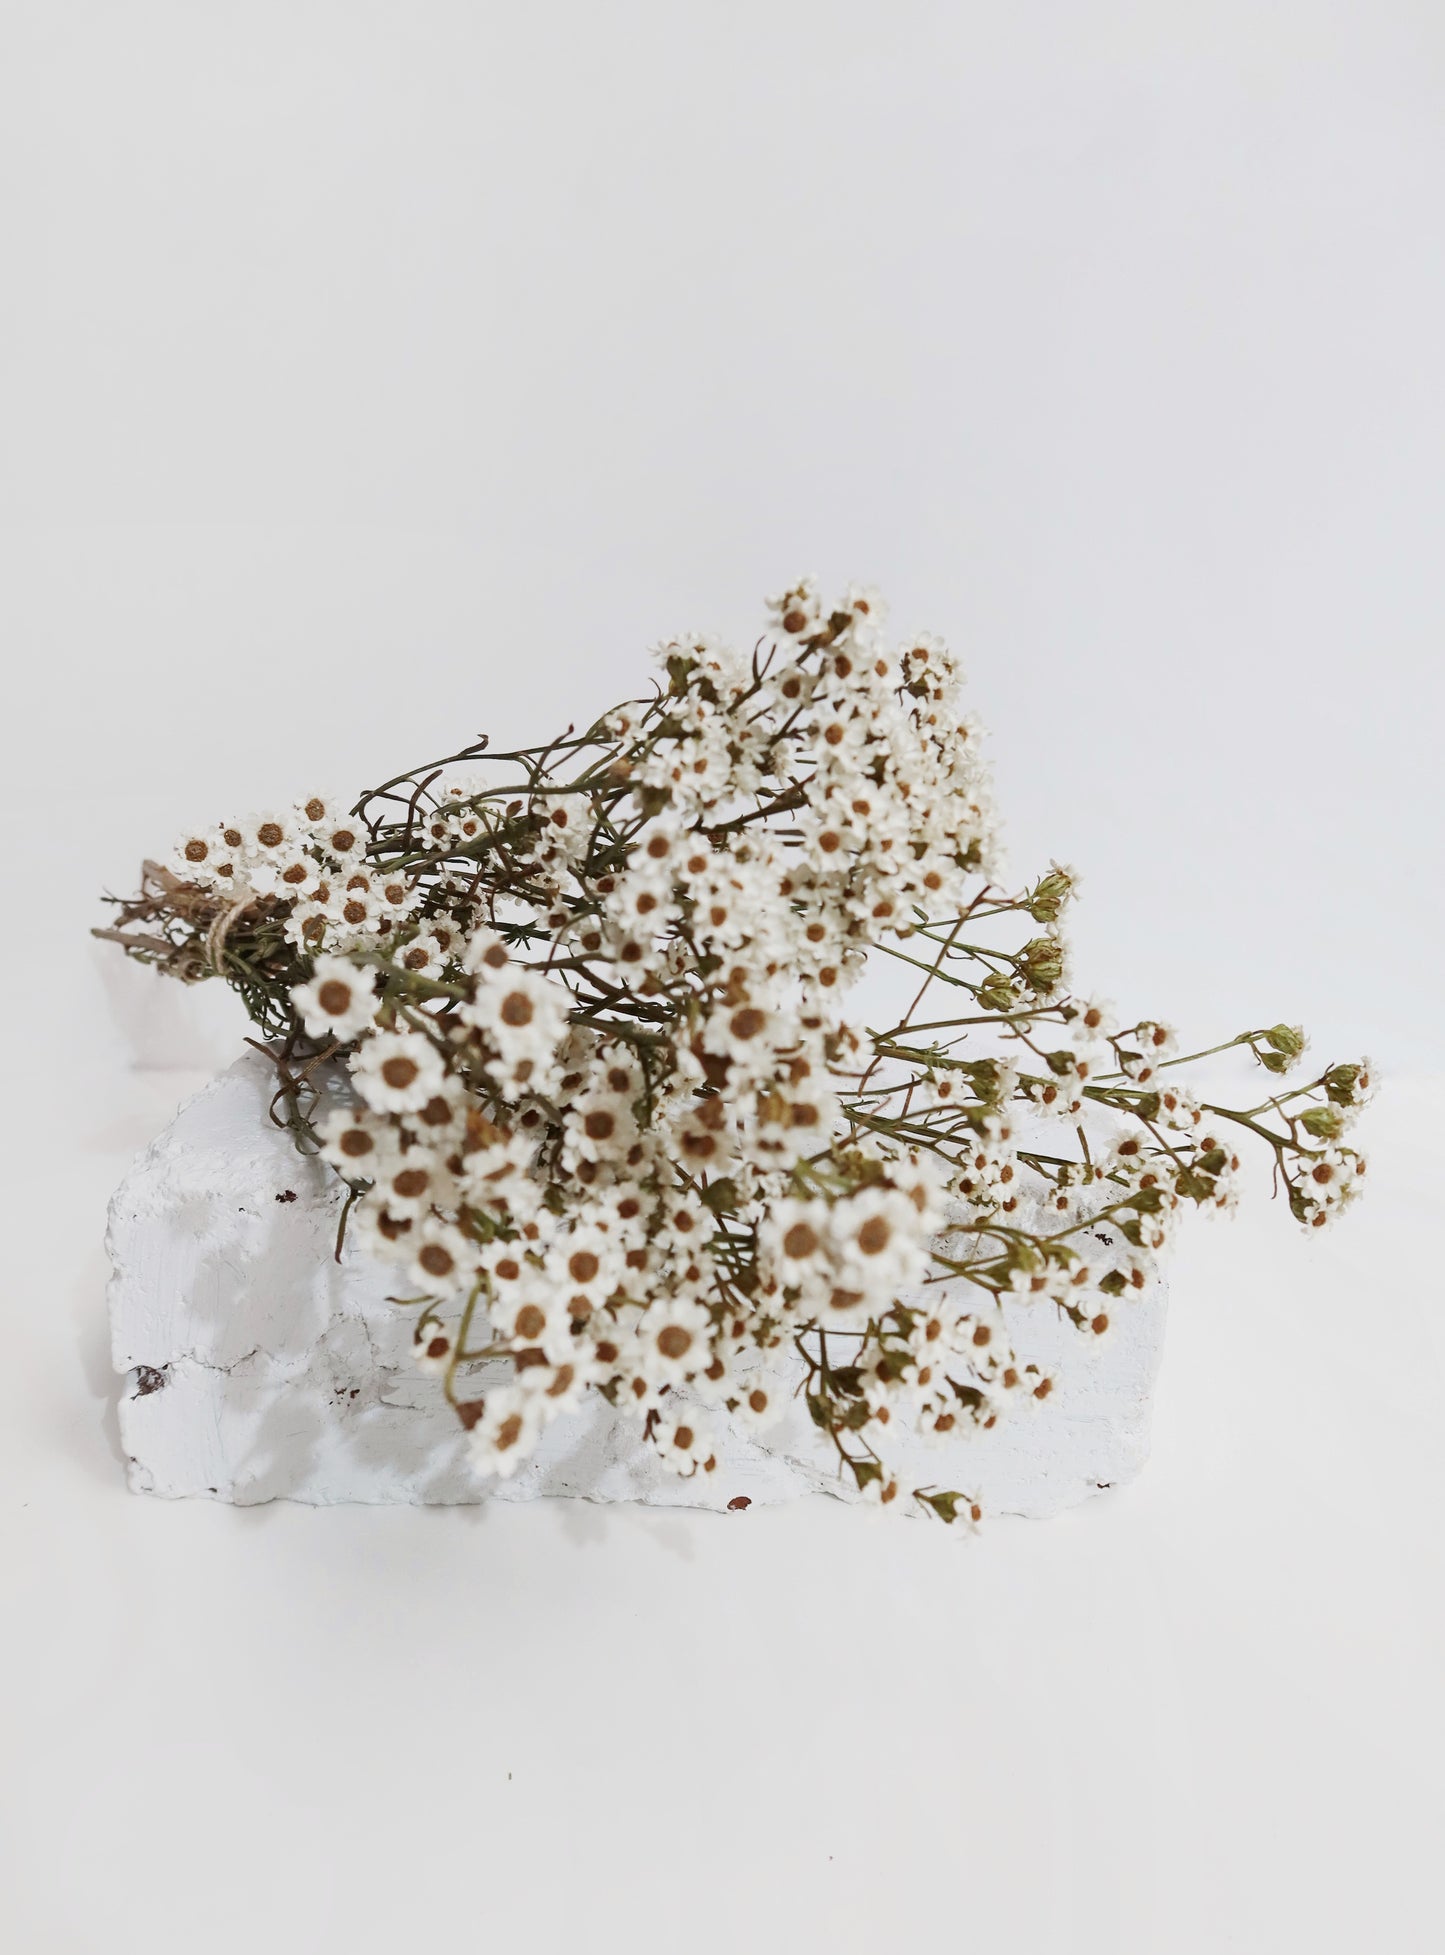 Dried and preserved earthy mini daisy bunch in white. Same day delivery available, Hobart Tasmania. Available to be shipped Australia wide.